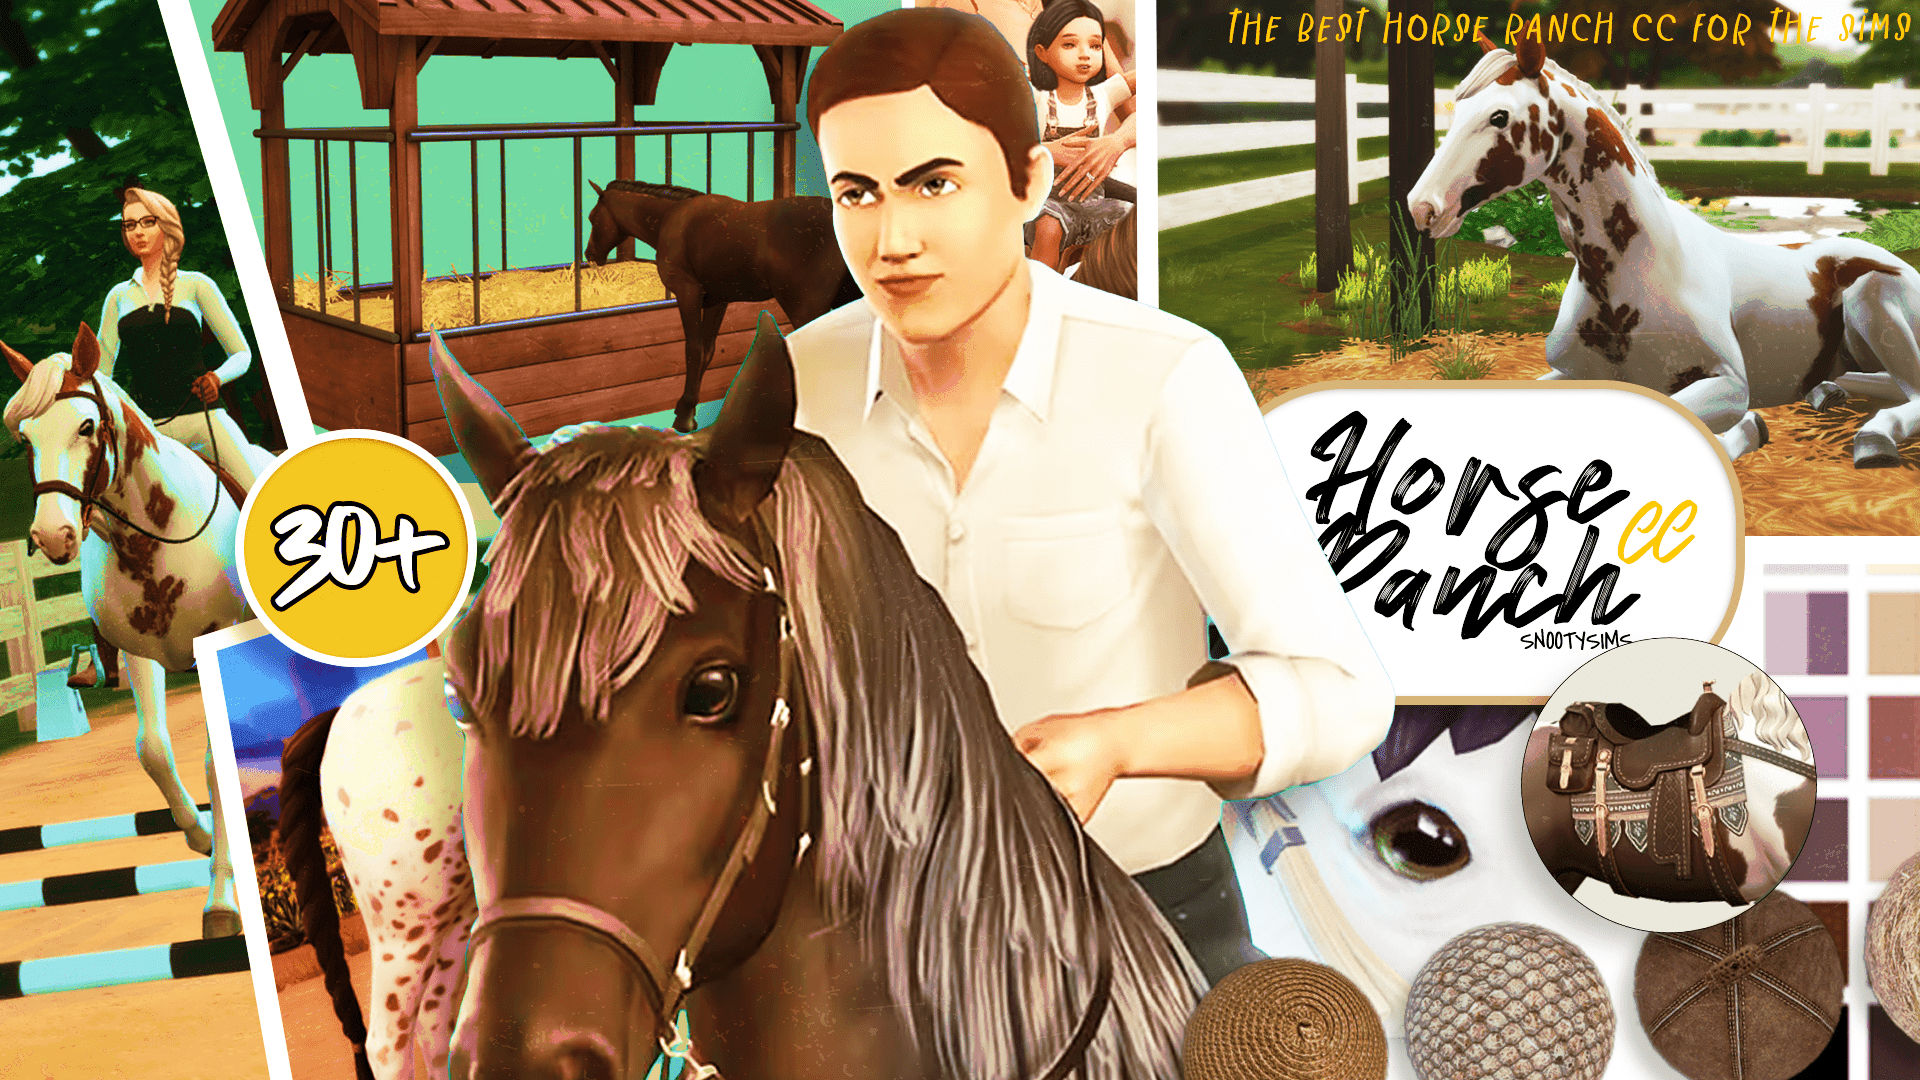 70+ Sims 4 Horse Ranch CC: Best CAS & Build/Buy Objects! — SNOOTYSIMS